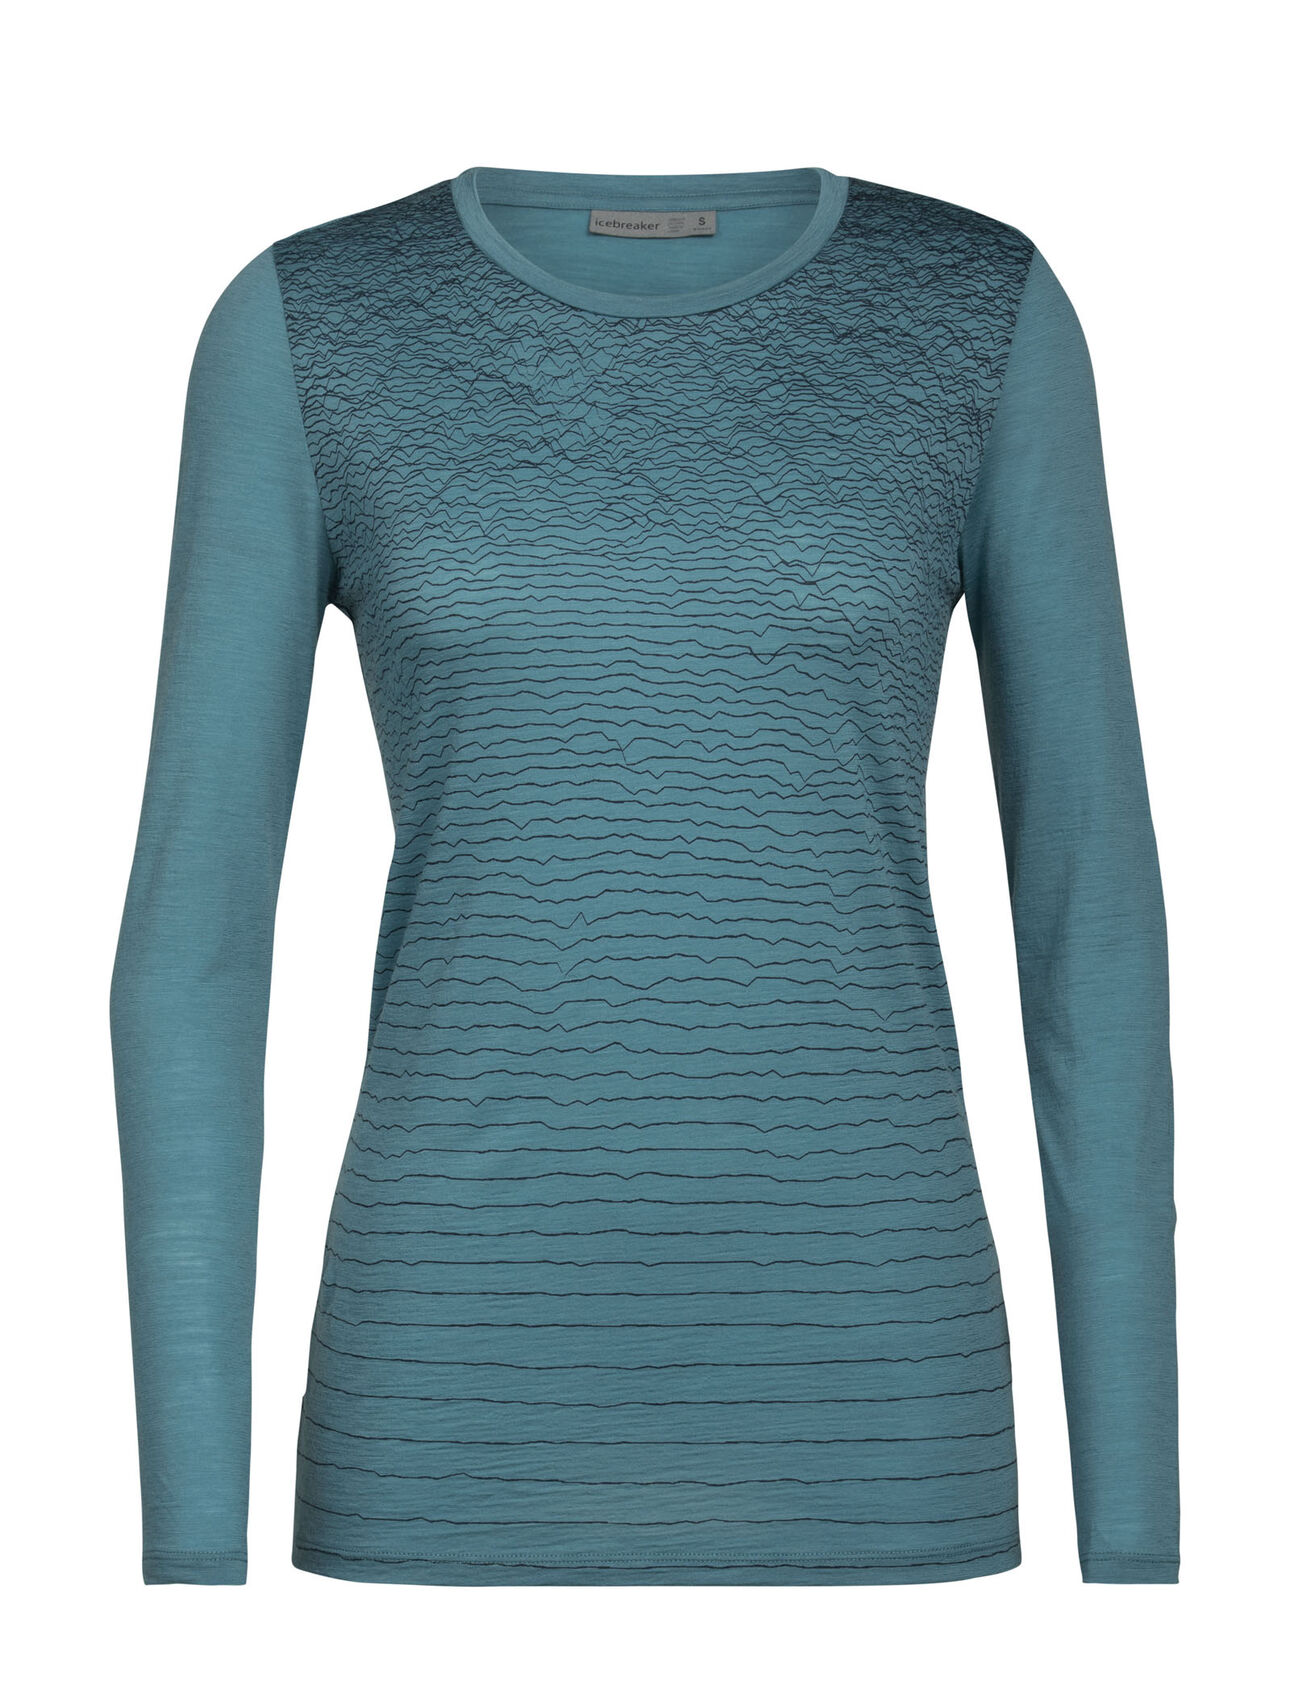 dla kobiet Merino Spector Long Sleeve Crewe T-Shirt Landscape Lines A lightweight, breathable, and versatile merino wool T-shirt ideal for everything from hiking to travel, our Spector Long Sleeve Crewe Landscape Lines is a go-to for any and every day.